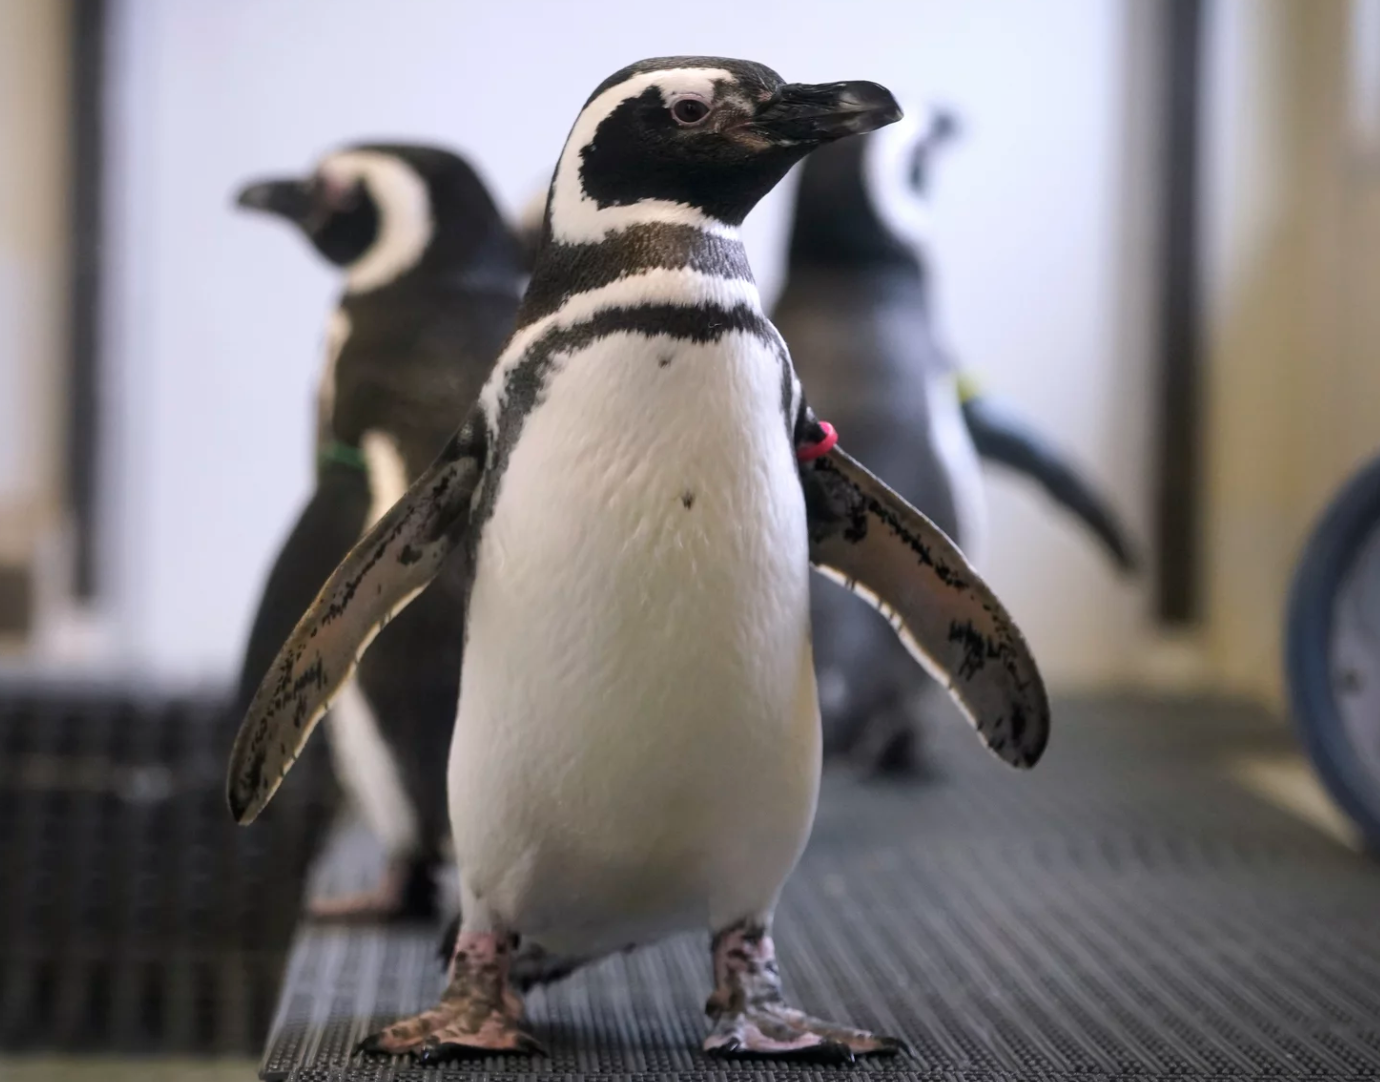 Magellan penguins stand in their enclosure at the Blank Park Zoo on Tuesday in Des Moines, Iowa. Zoos across North America are moving their birds indoors and away from people and wildlife as they try to protect them from the highly contagious and potentially deadly avian influenza.